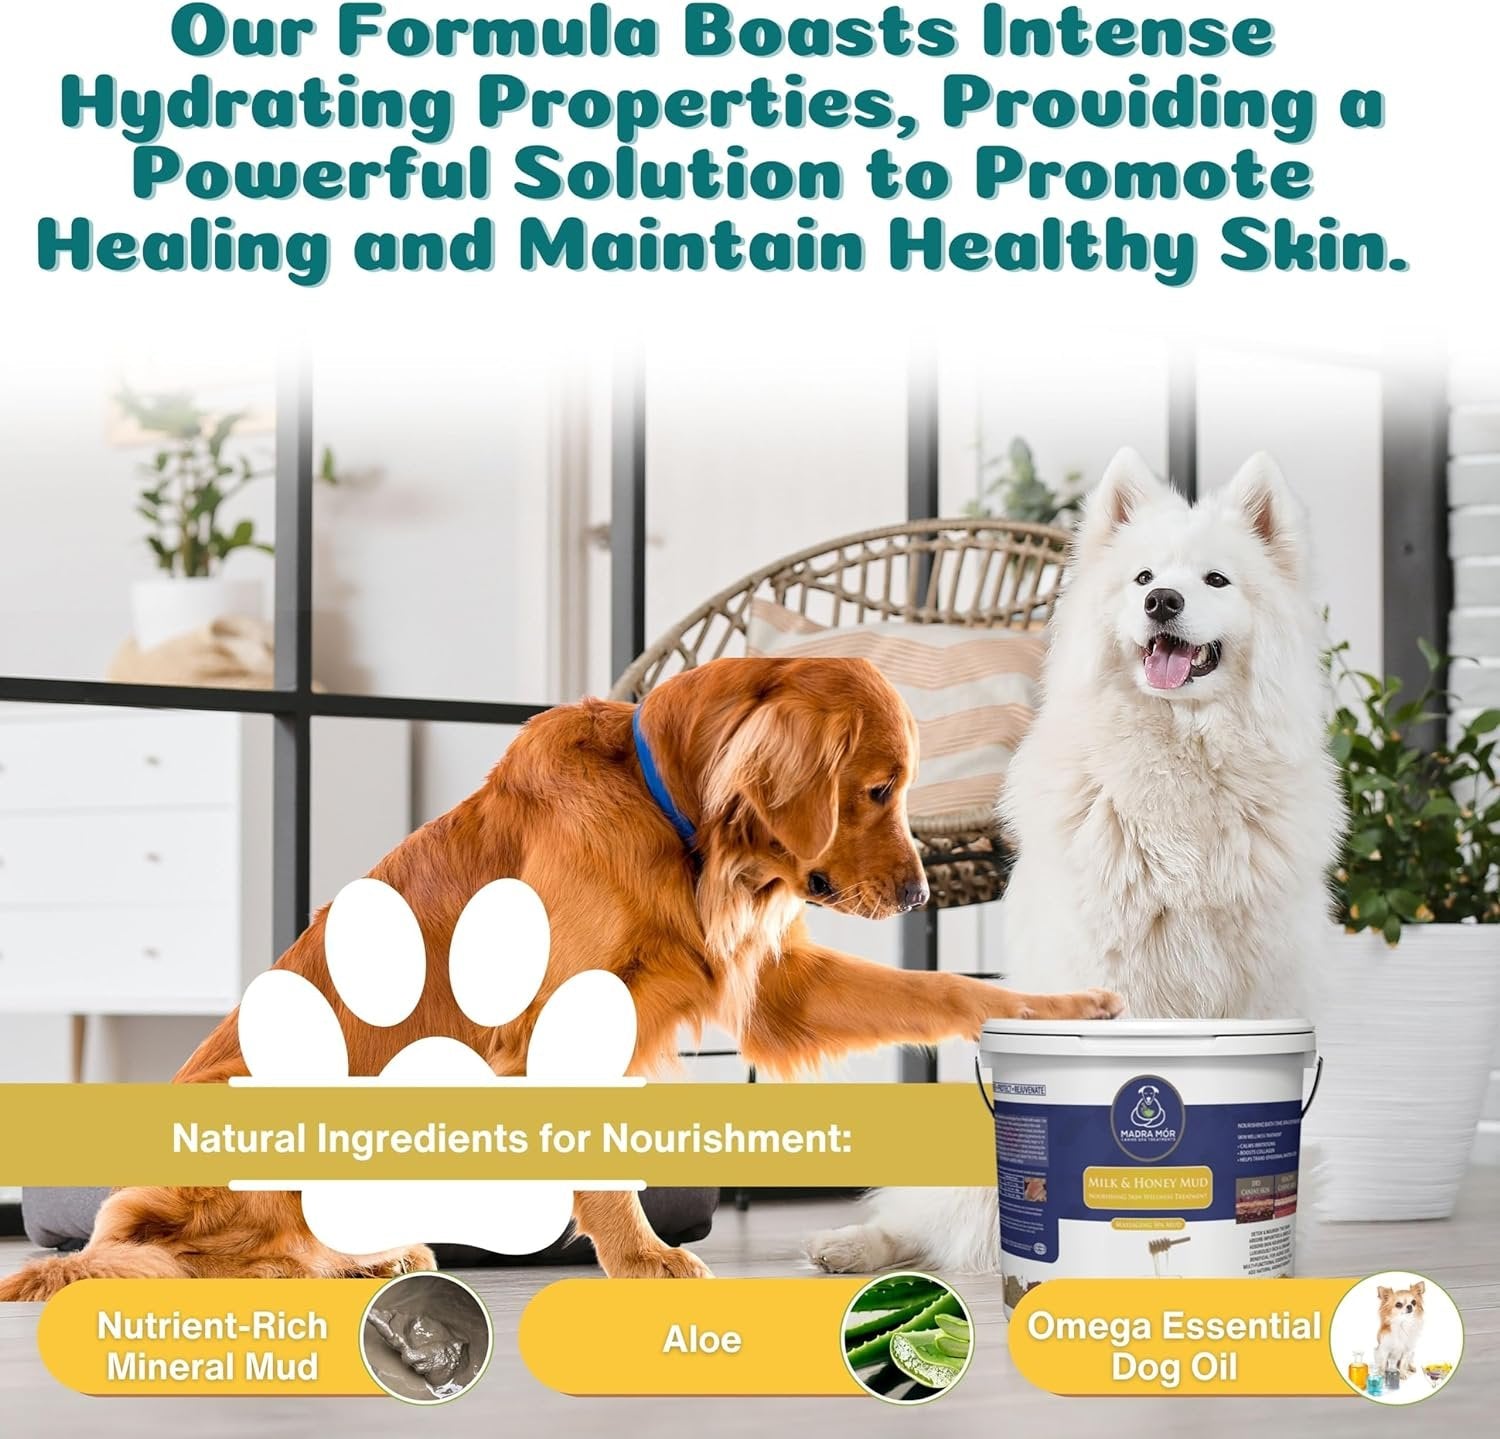 Madra Mor - Milk & Honey Mud Massaging Spa Bath for Dogs - Skin Care, Grooming - 1 Pack of 7.5 lb (3.4L) - with Multi-Purpose Key Chain